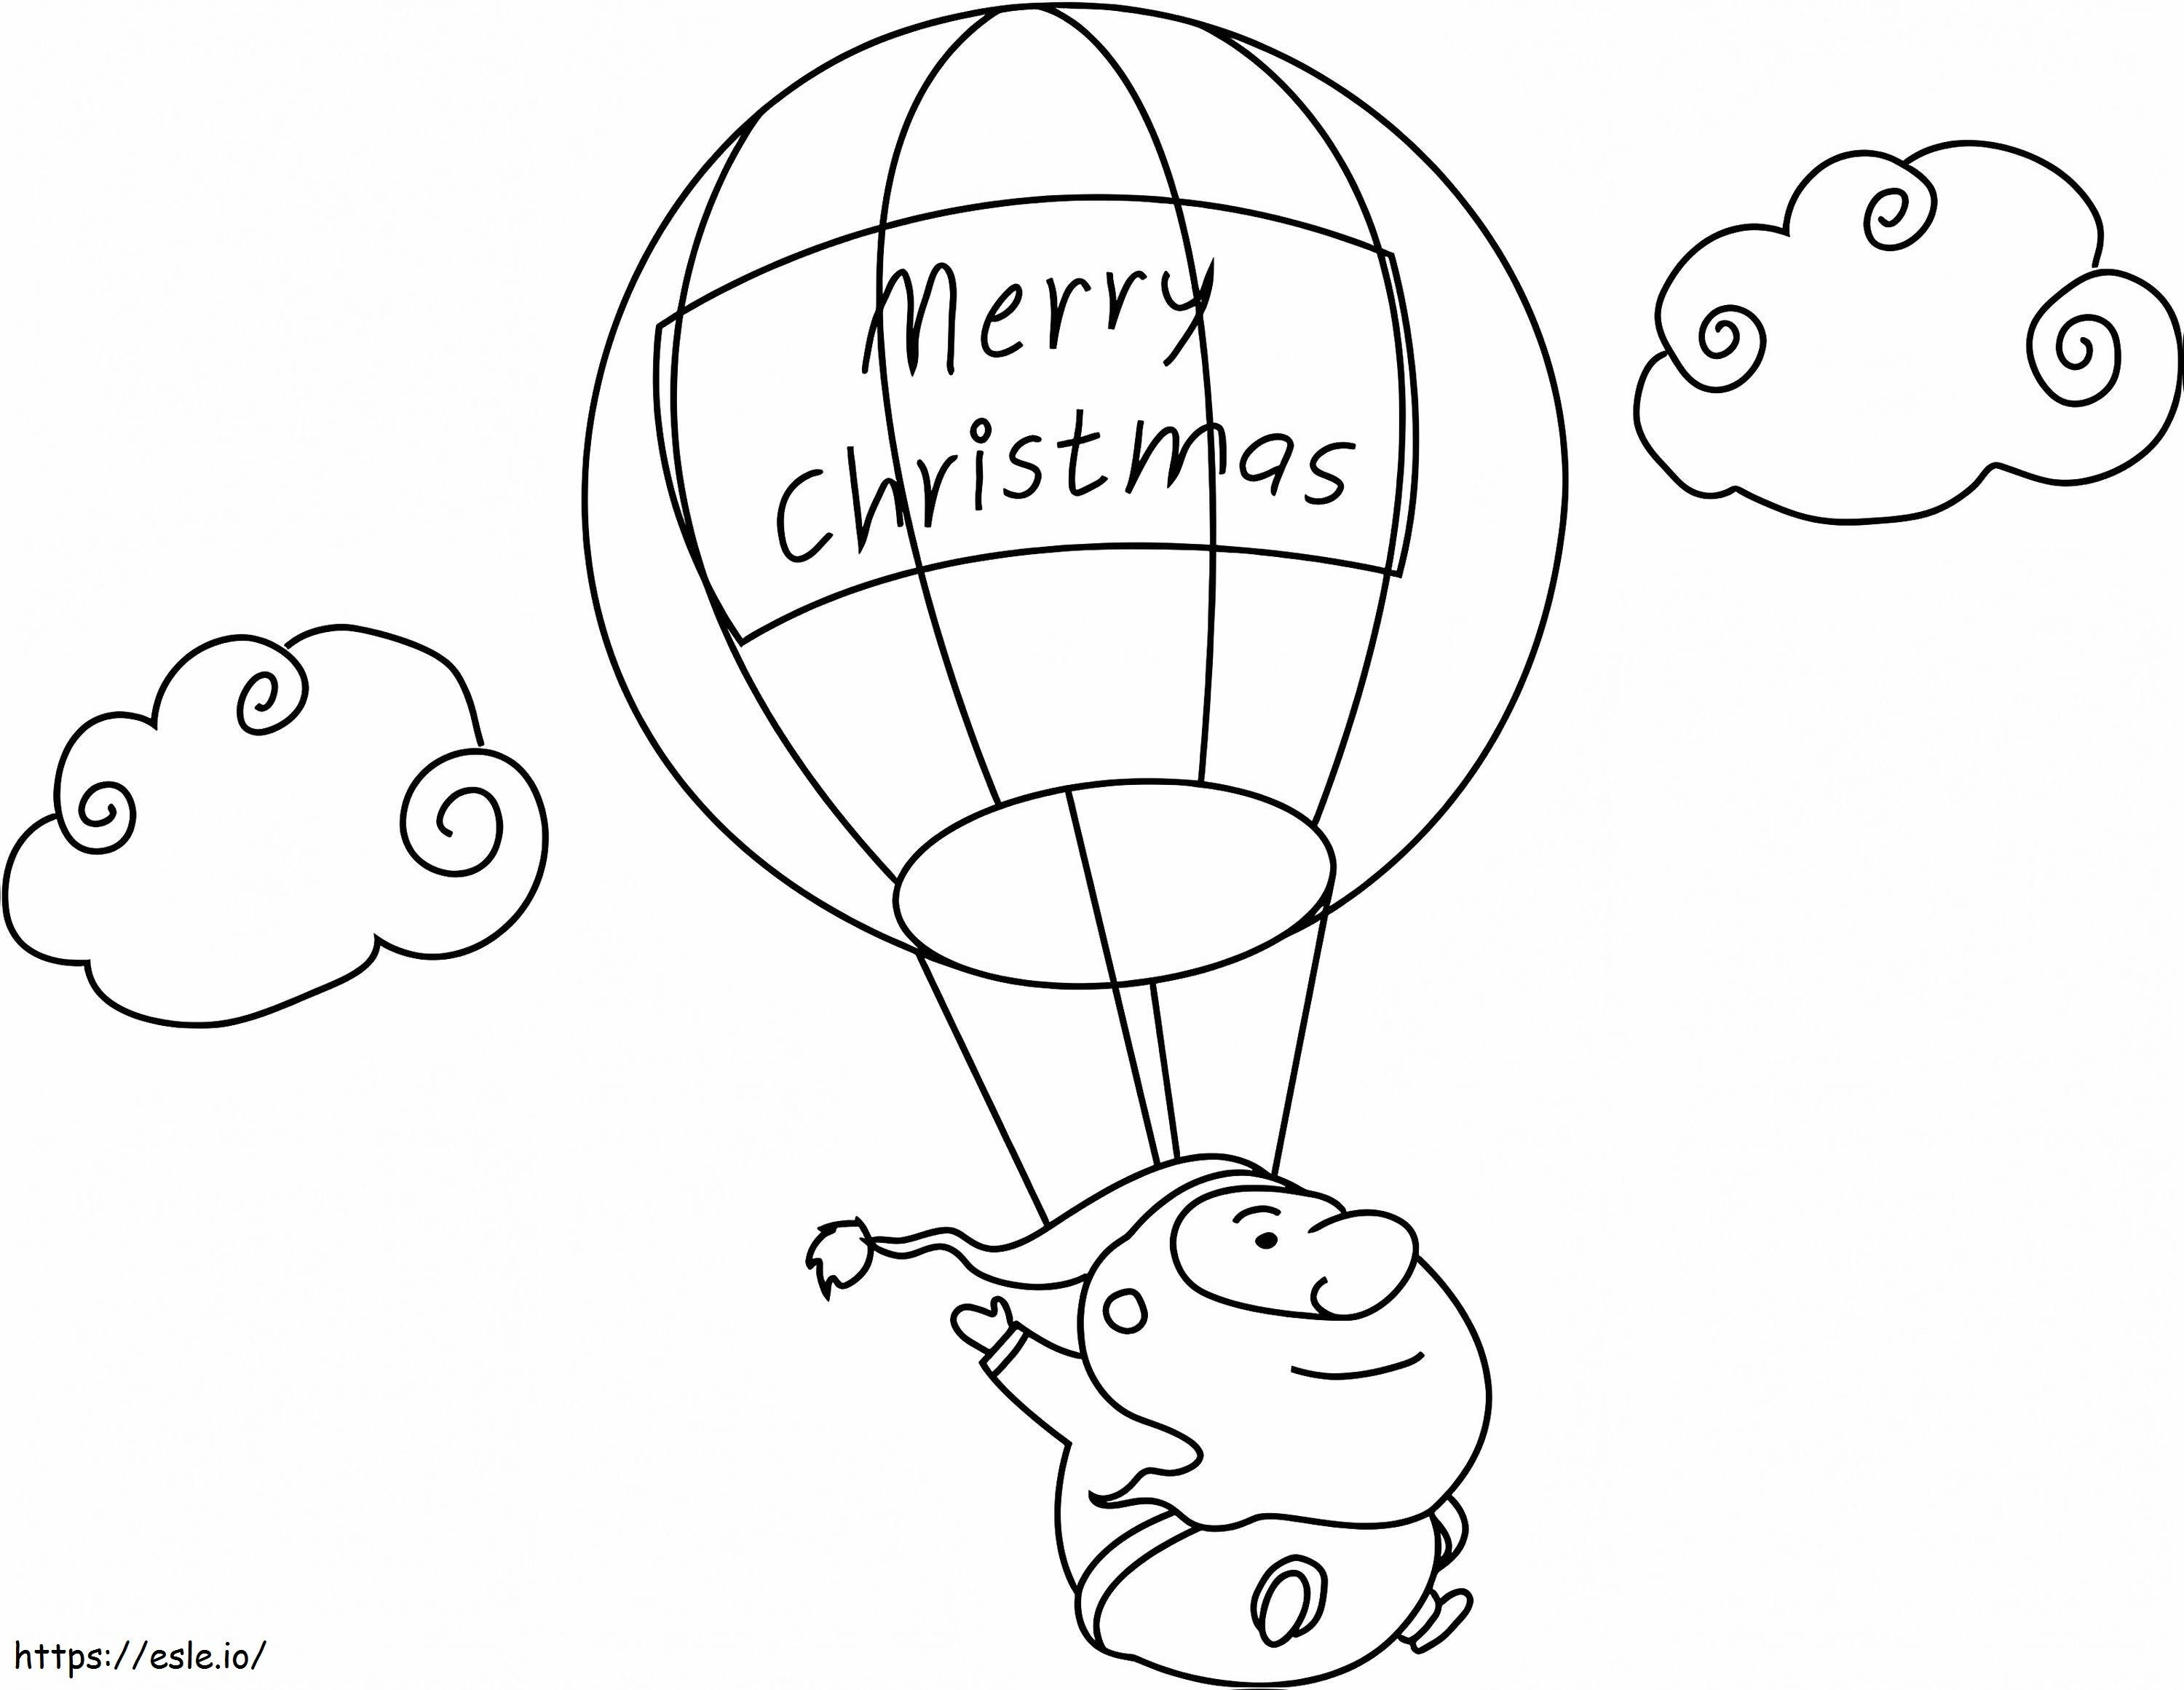 1530063550 58 coloring page